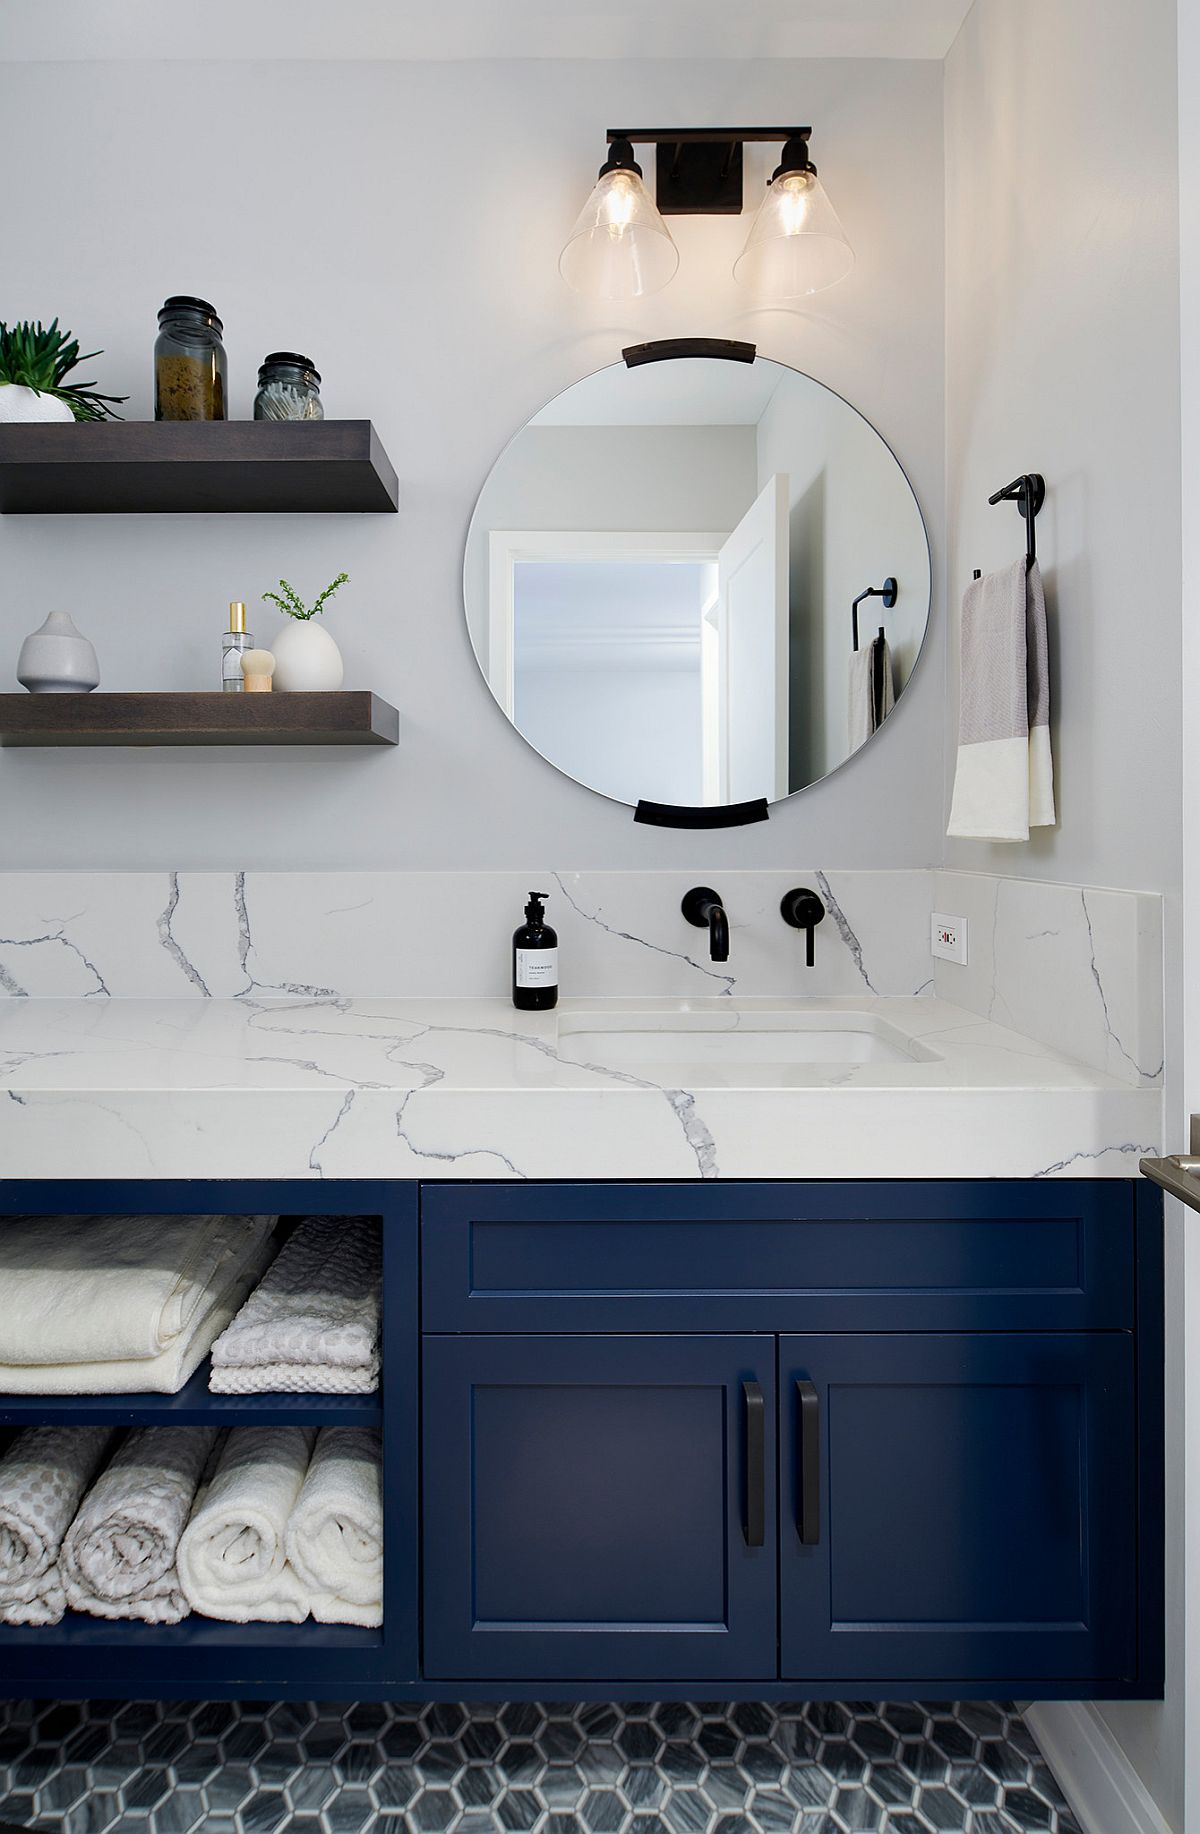 White countertops, walls and lovely lighting accentuate the appeal of the dark blue vanity